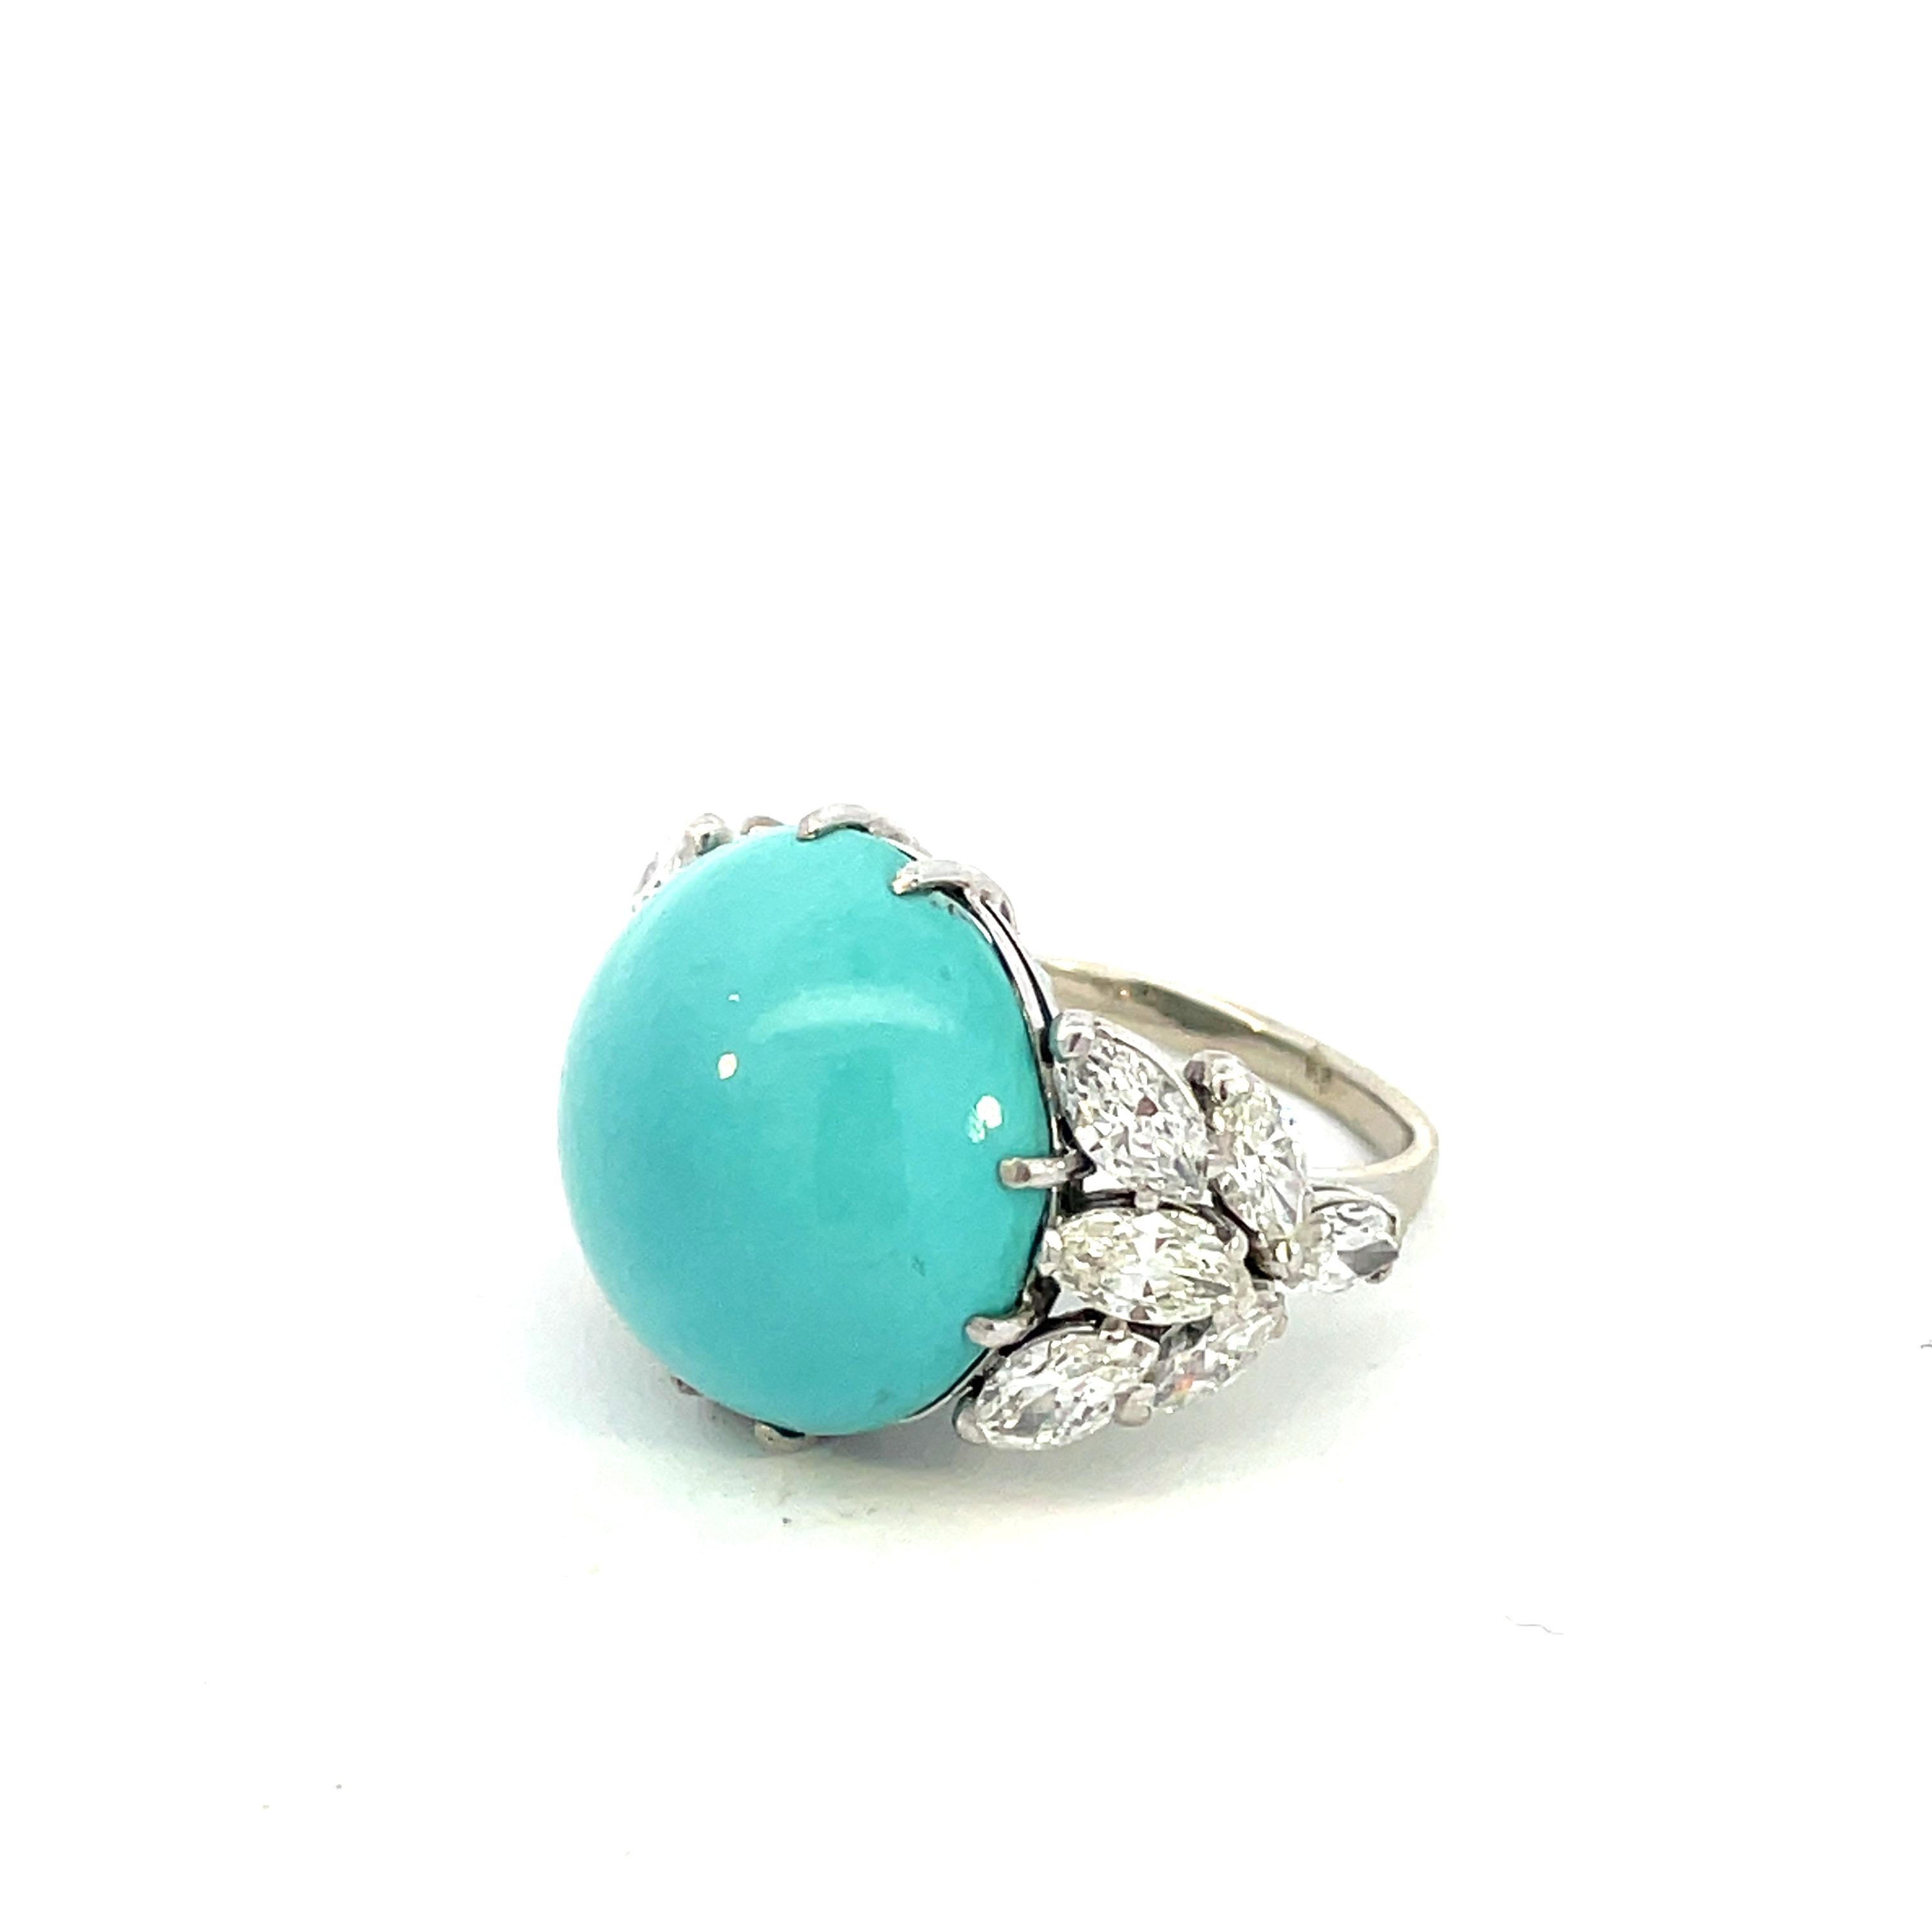 Very chic 1970's Vintage ring fancing  Navette diamonds and Natural Turquoise  round Cabochon.
The N 12 large Navette cut side diamond altogheter weighting about 2,4 carats G-H color VVs/Vs clarity
The Natural Turquoise has a beautiful color and